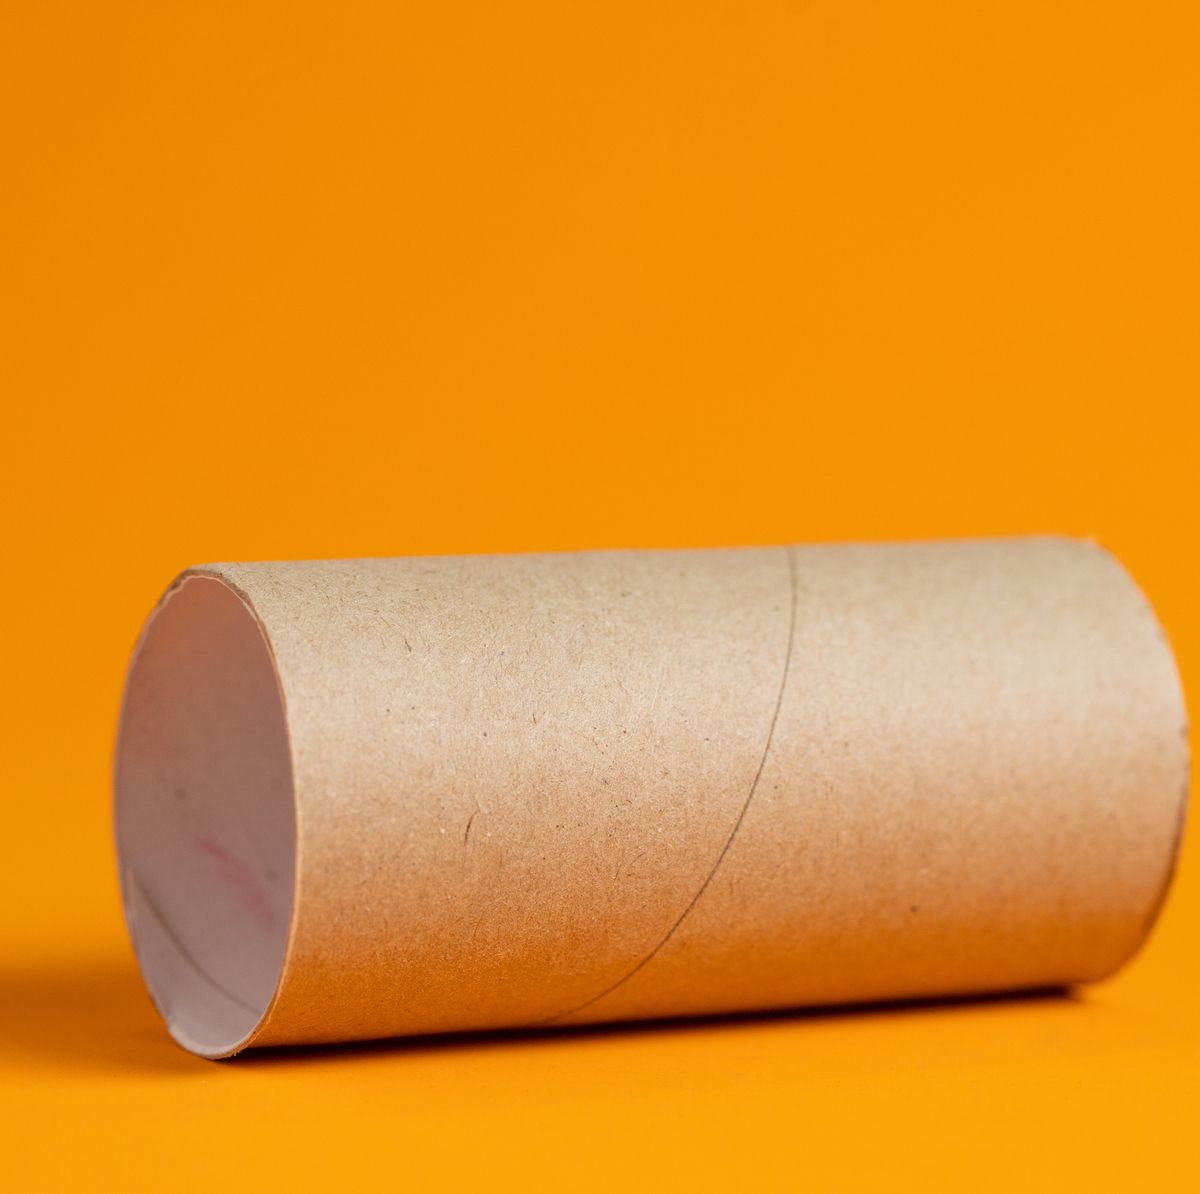 Do You Remember? - Remember when color toilet paper was popular